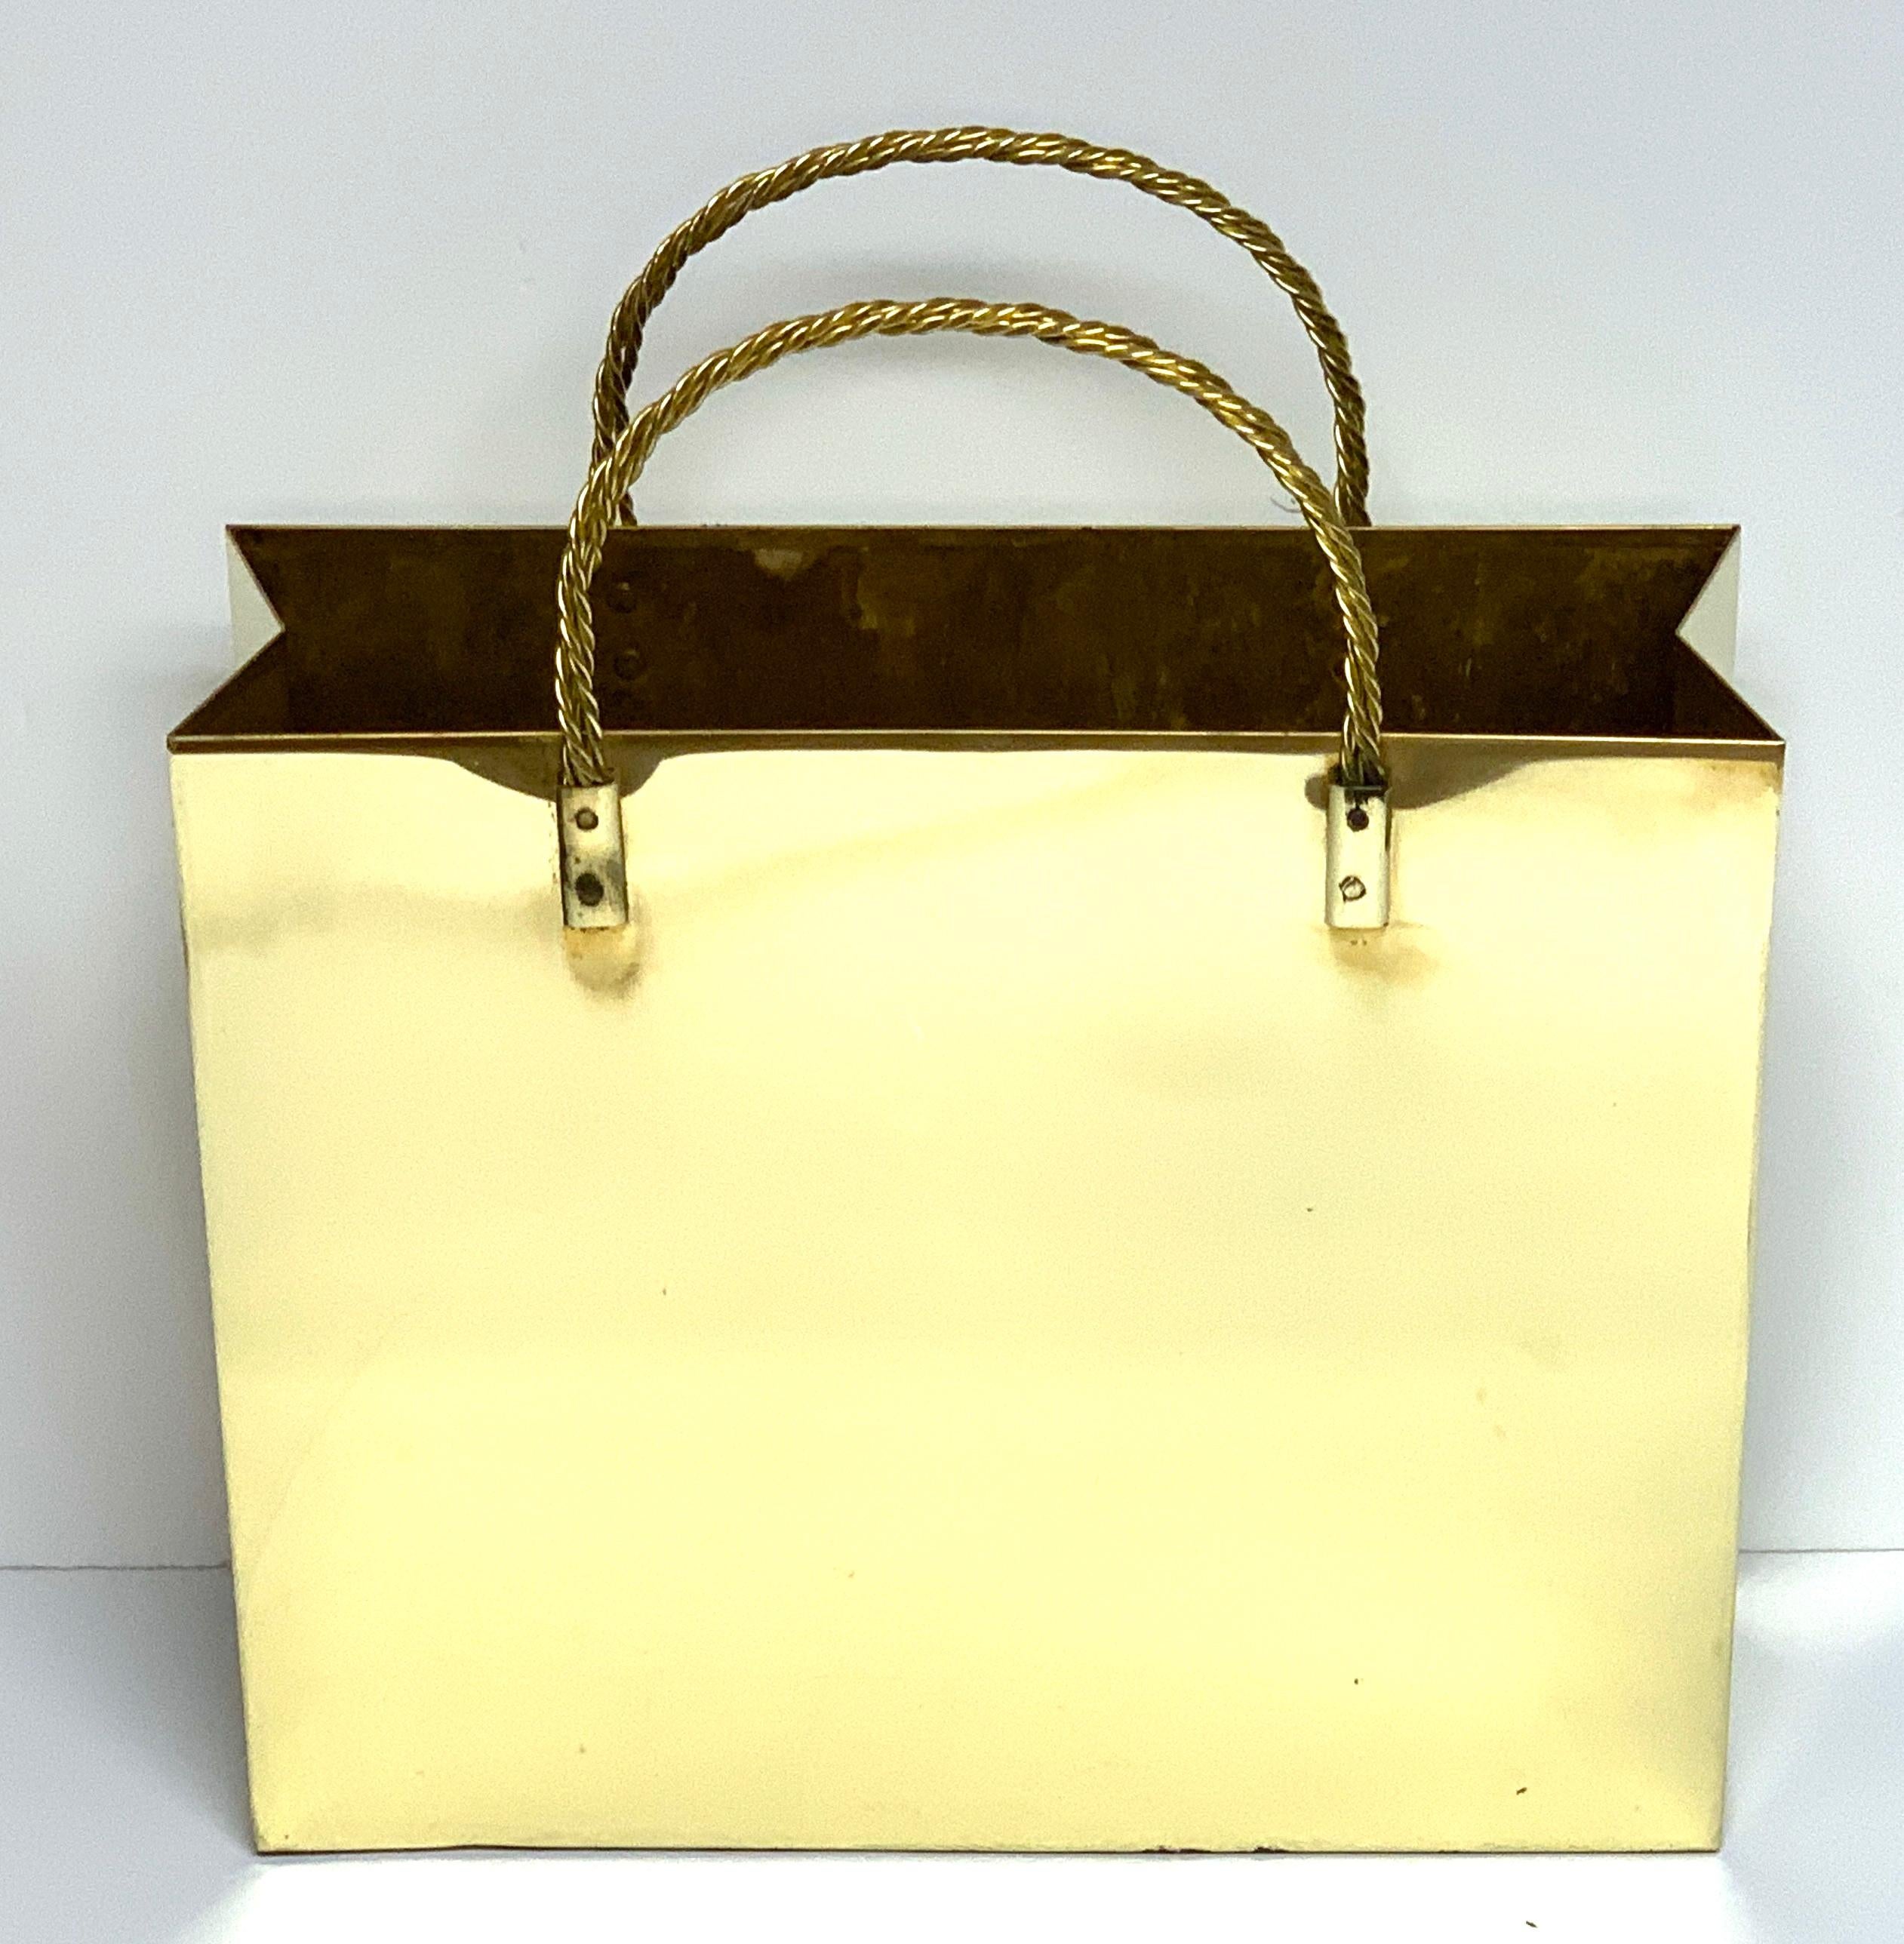 Italian midcentury medium brass shopping bag, in the manner of Gio Ponti. Great as wastepaper basket, magazine or sculpture. Realistically cast and modeled. Professionally polished, ready to place. 
The opening is 12